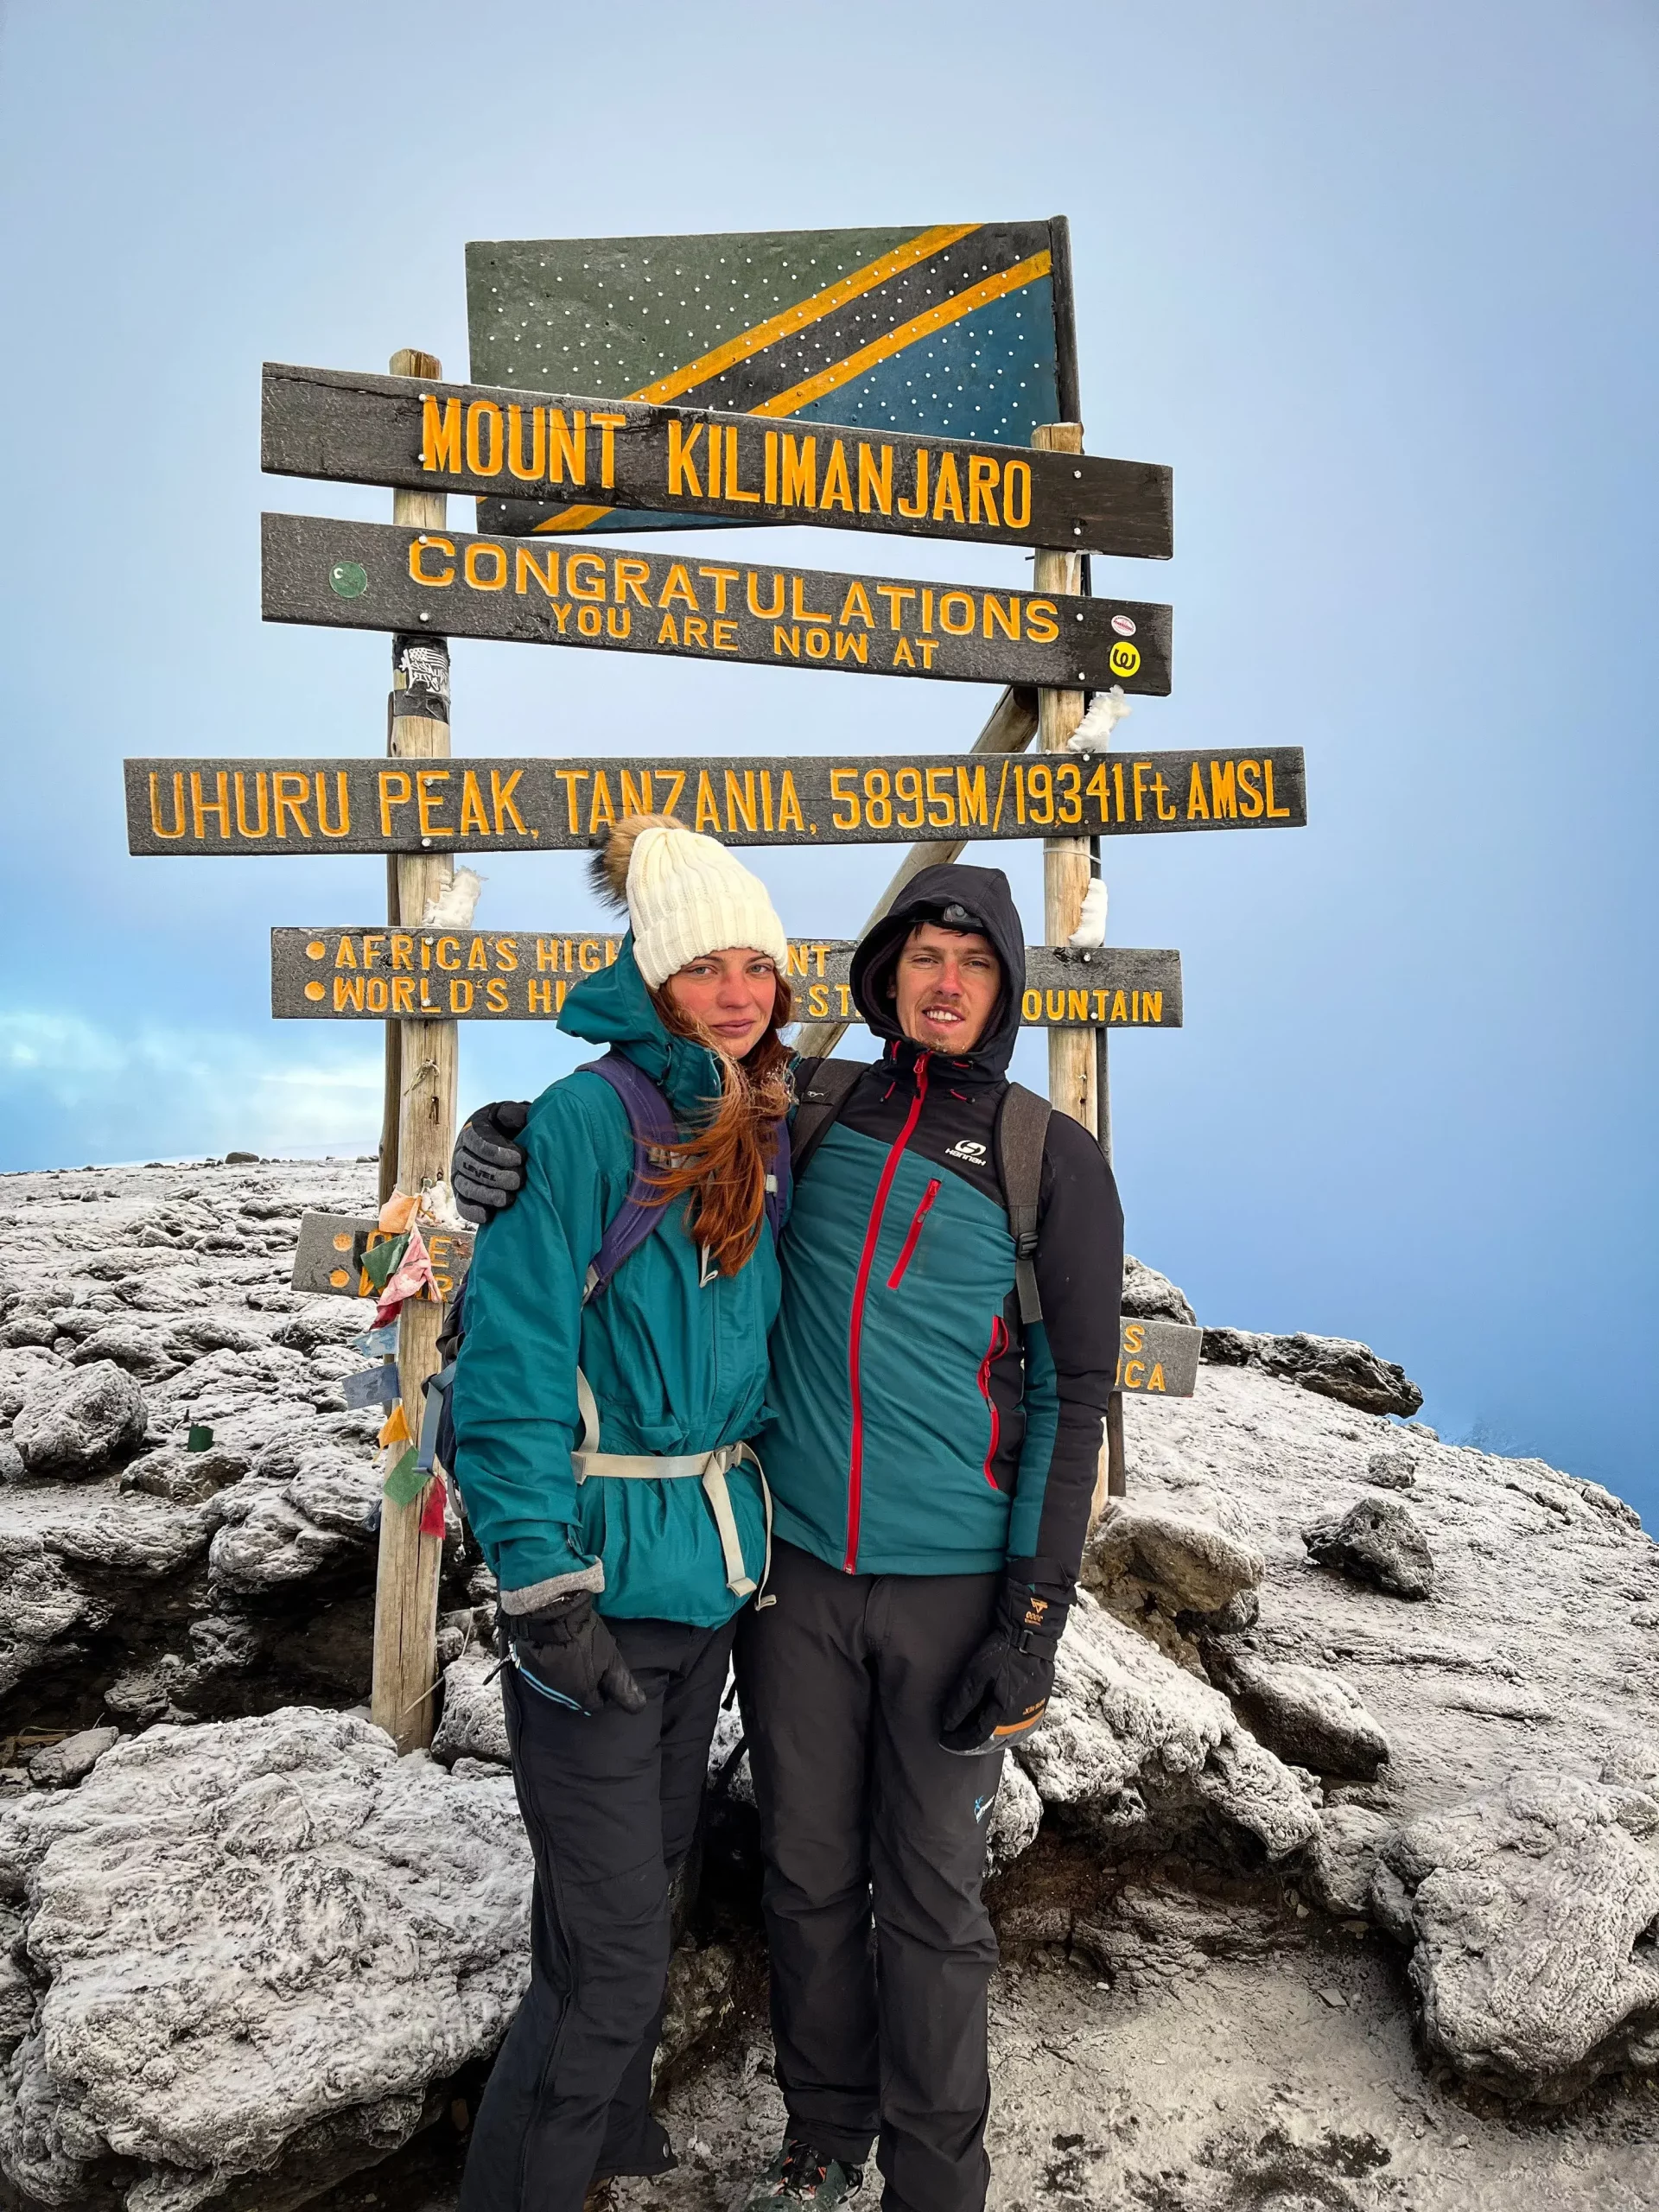 Our travelers who are couple taking a picture with the Kilimanjaro summit at uhuru peak